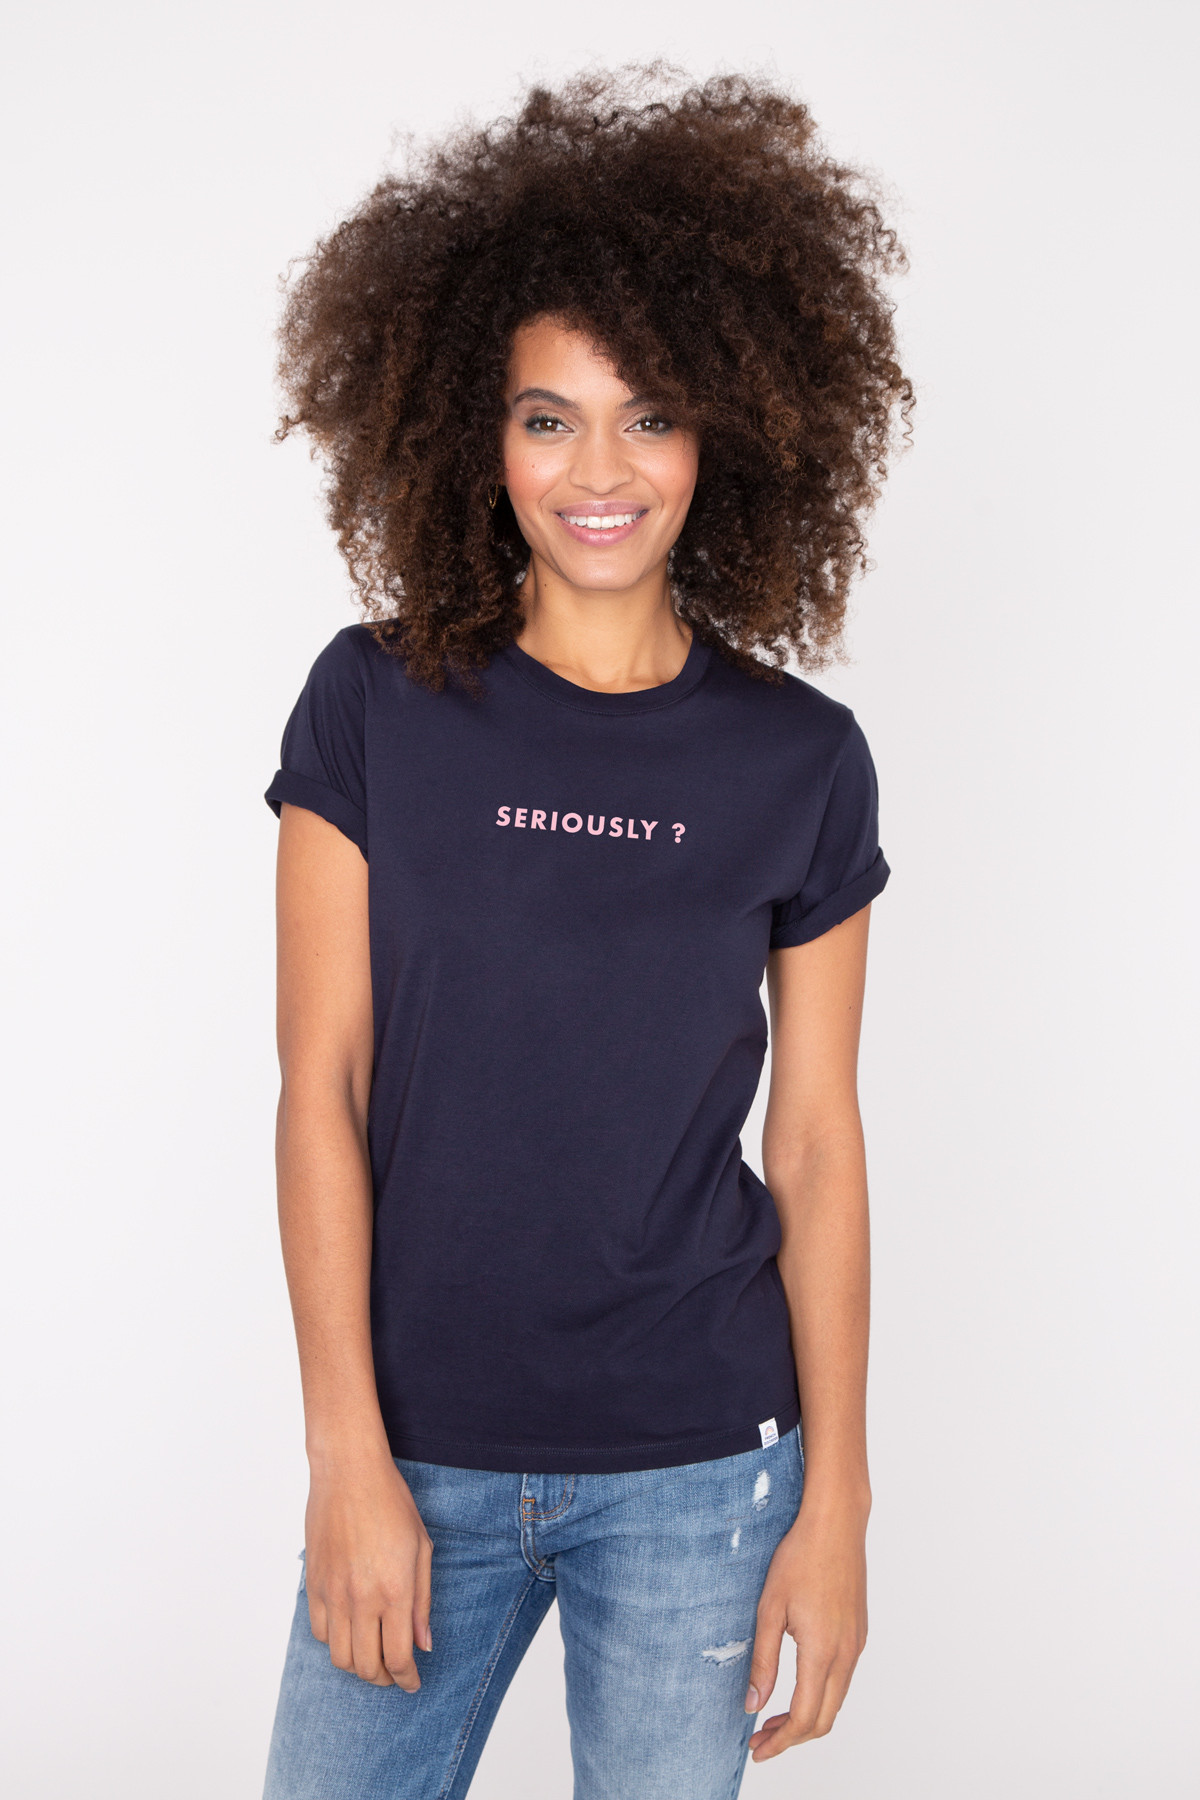 Photo de T-SHIRTS COL ROND Tshirt SERIOUSLY ? chez French Disorder